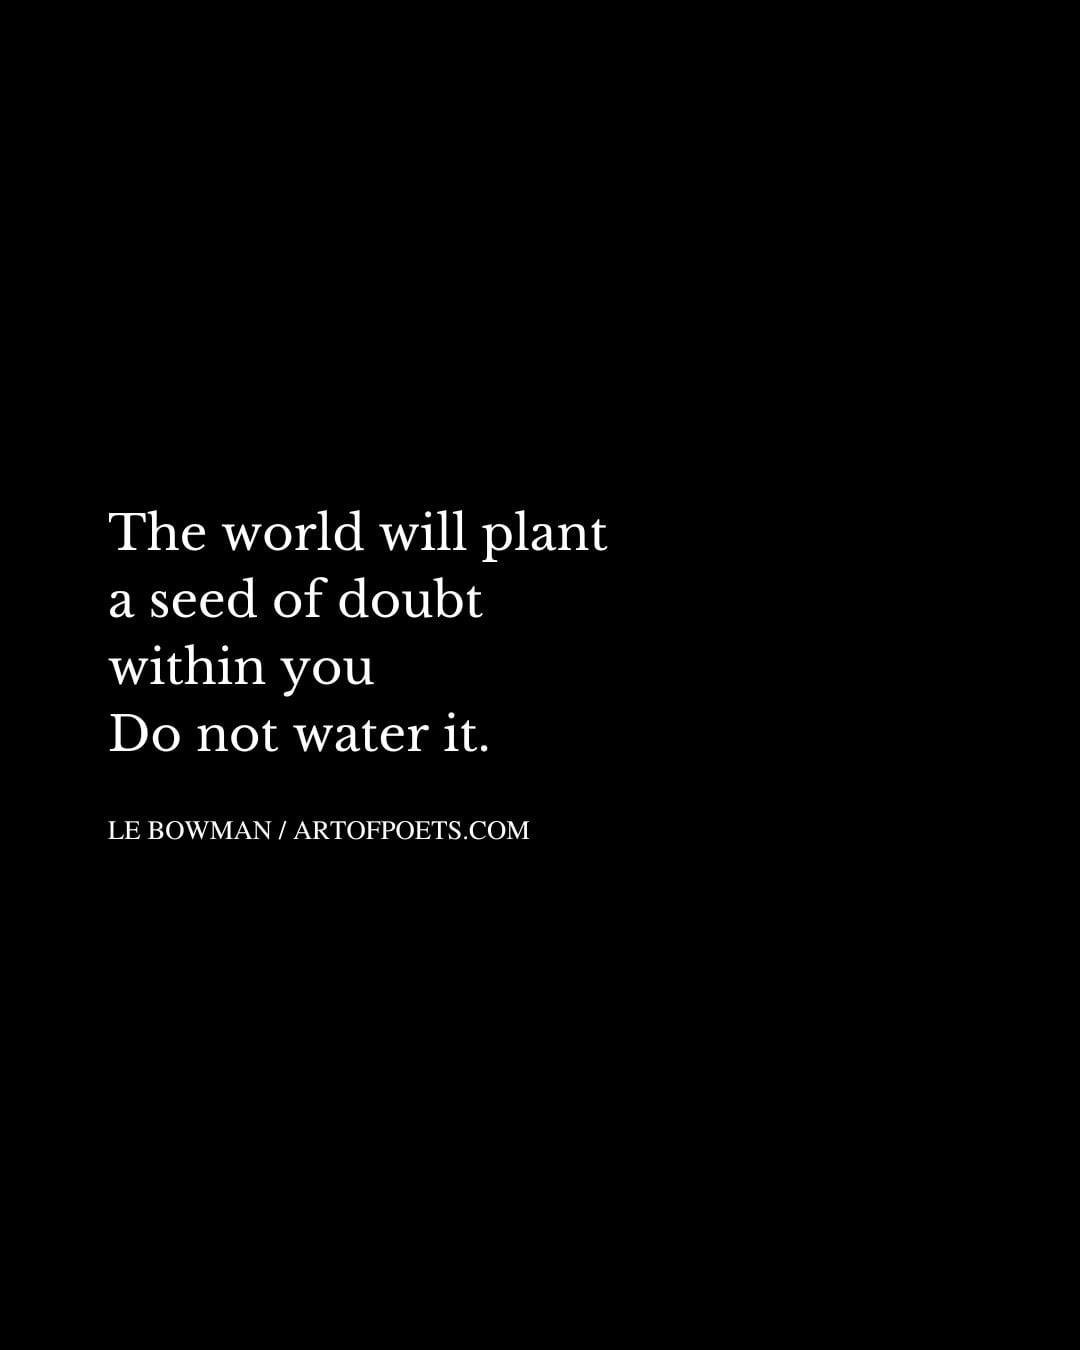 The world will plant a seed of doubt within you Do not water it